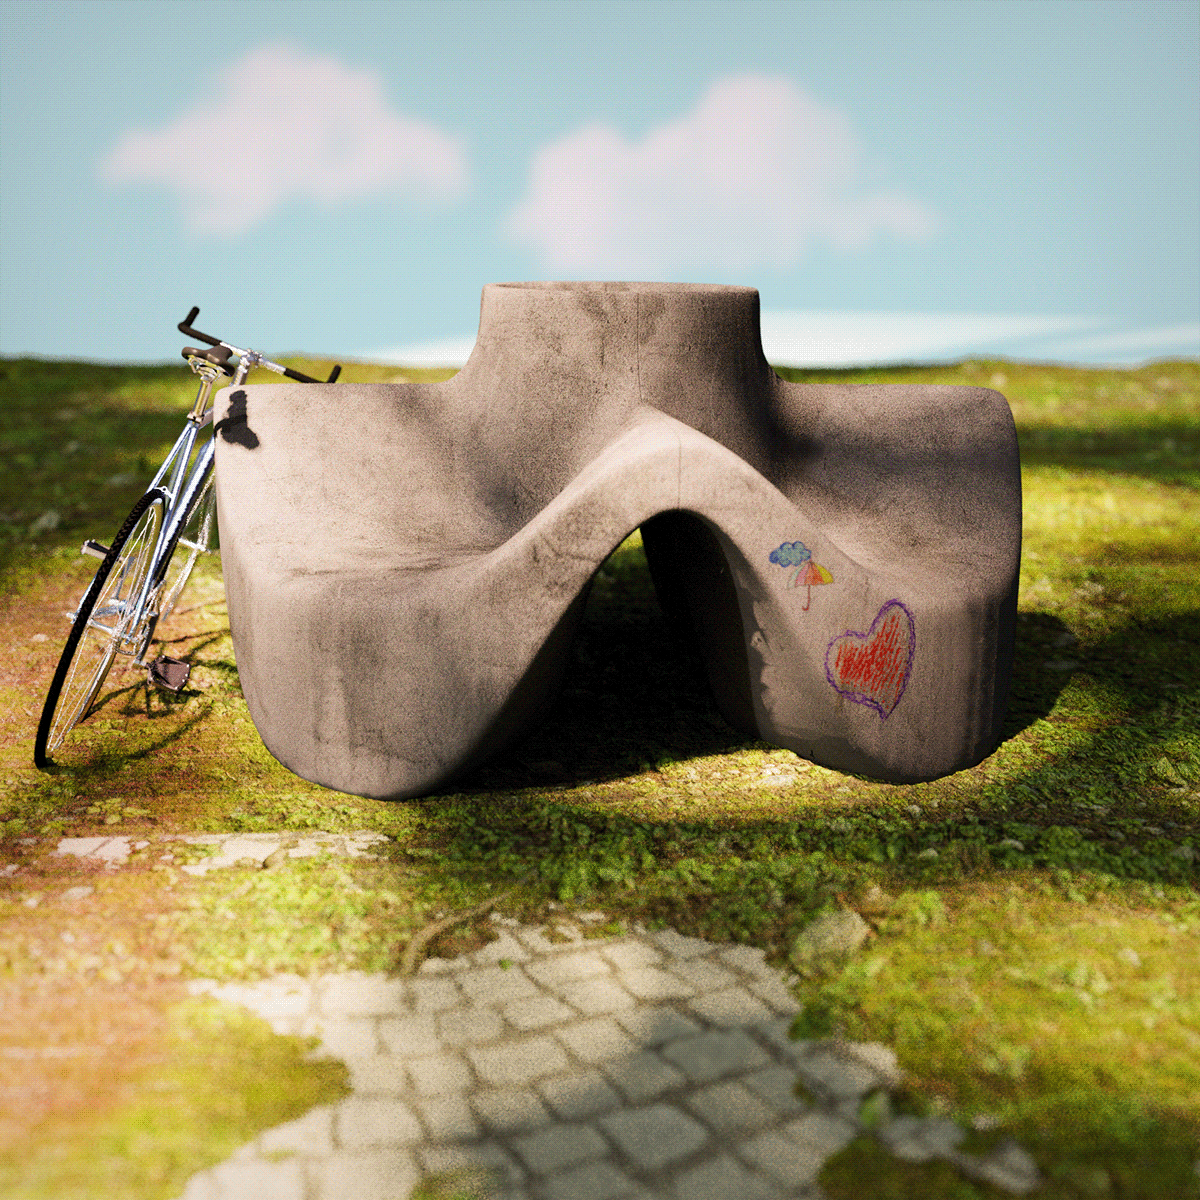 3D architecture cement CGI industrial design  Outdoor parkbench product design  Render visualization